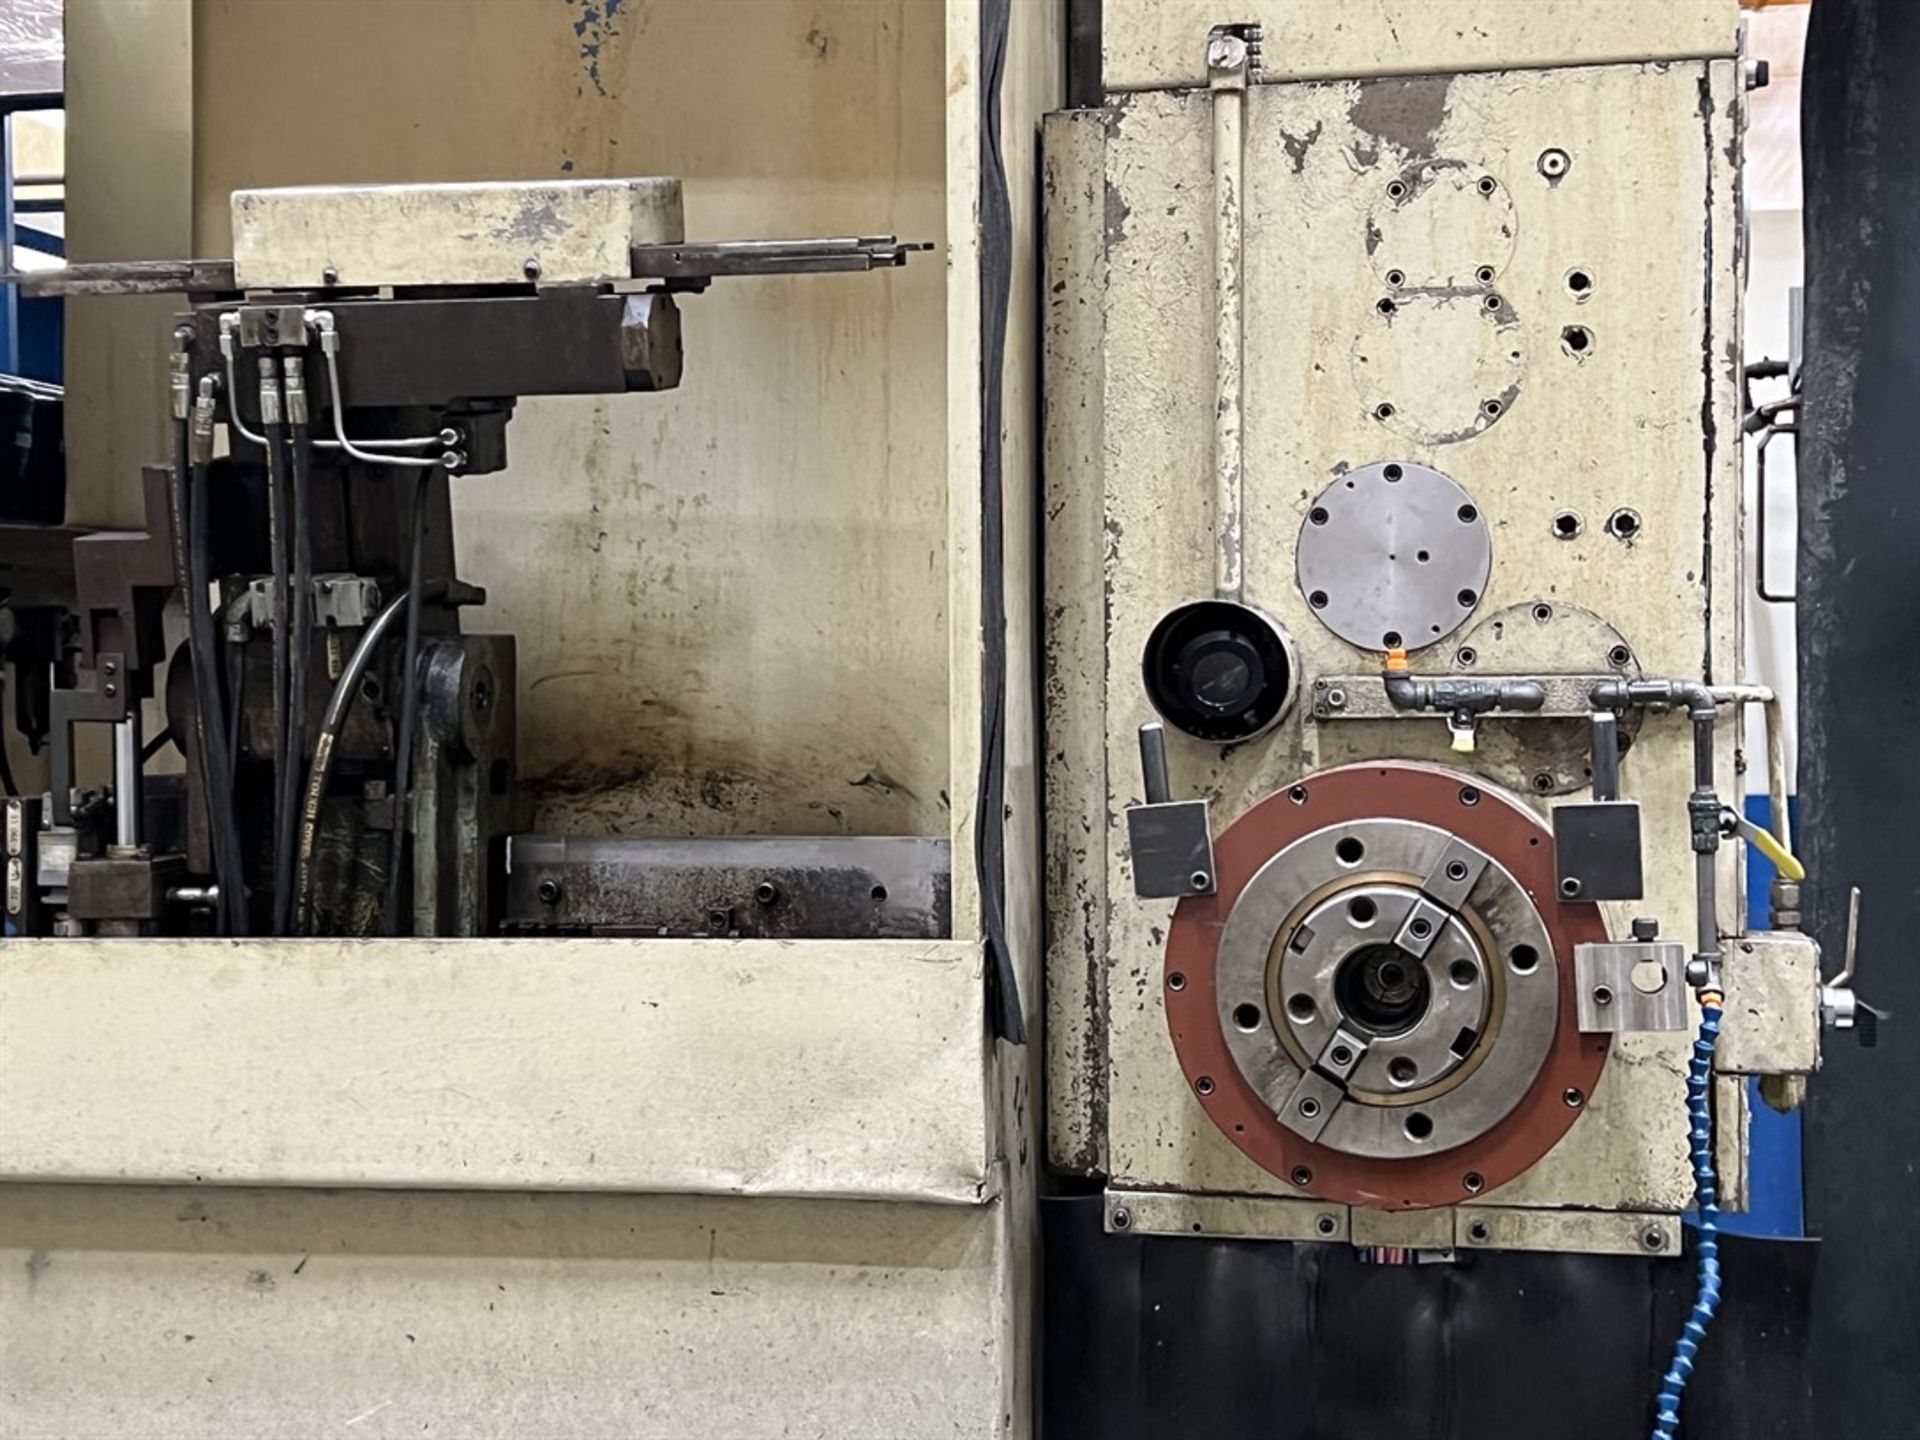 GIDDINGS & LEWIS MC-60 S Horizontal Machining Center, s/n 450-172-86, G & L 8000 Control, 6” Spindle - Image 5 of 13